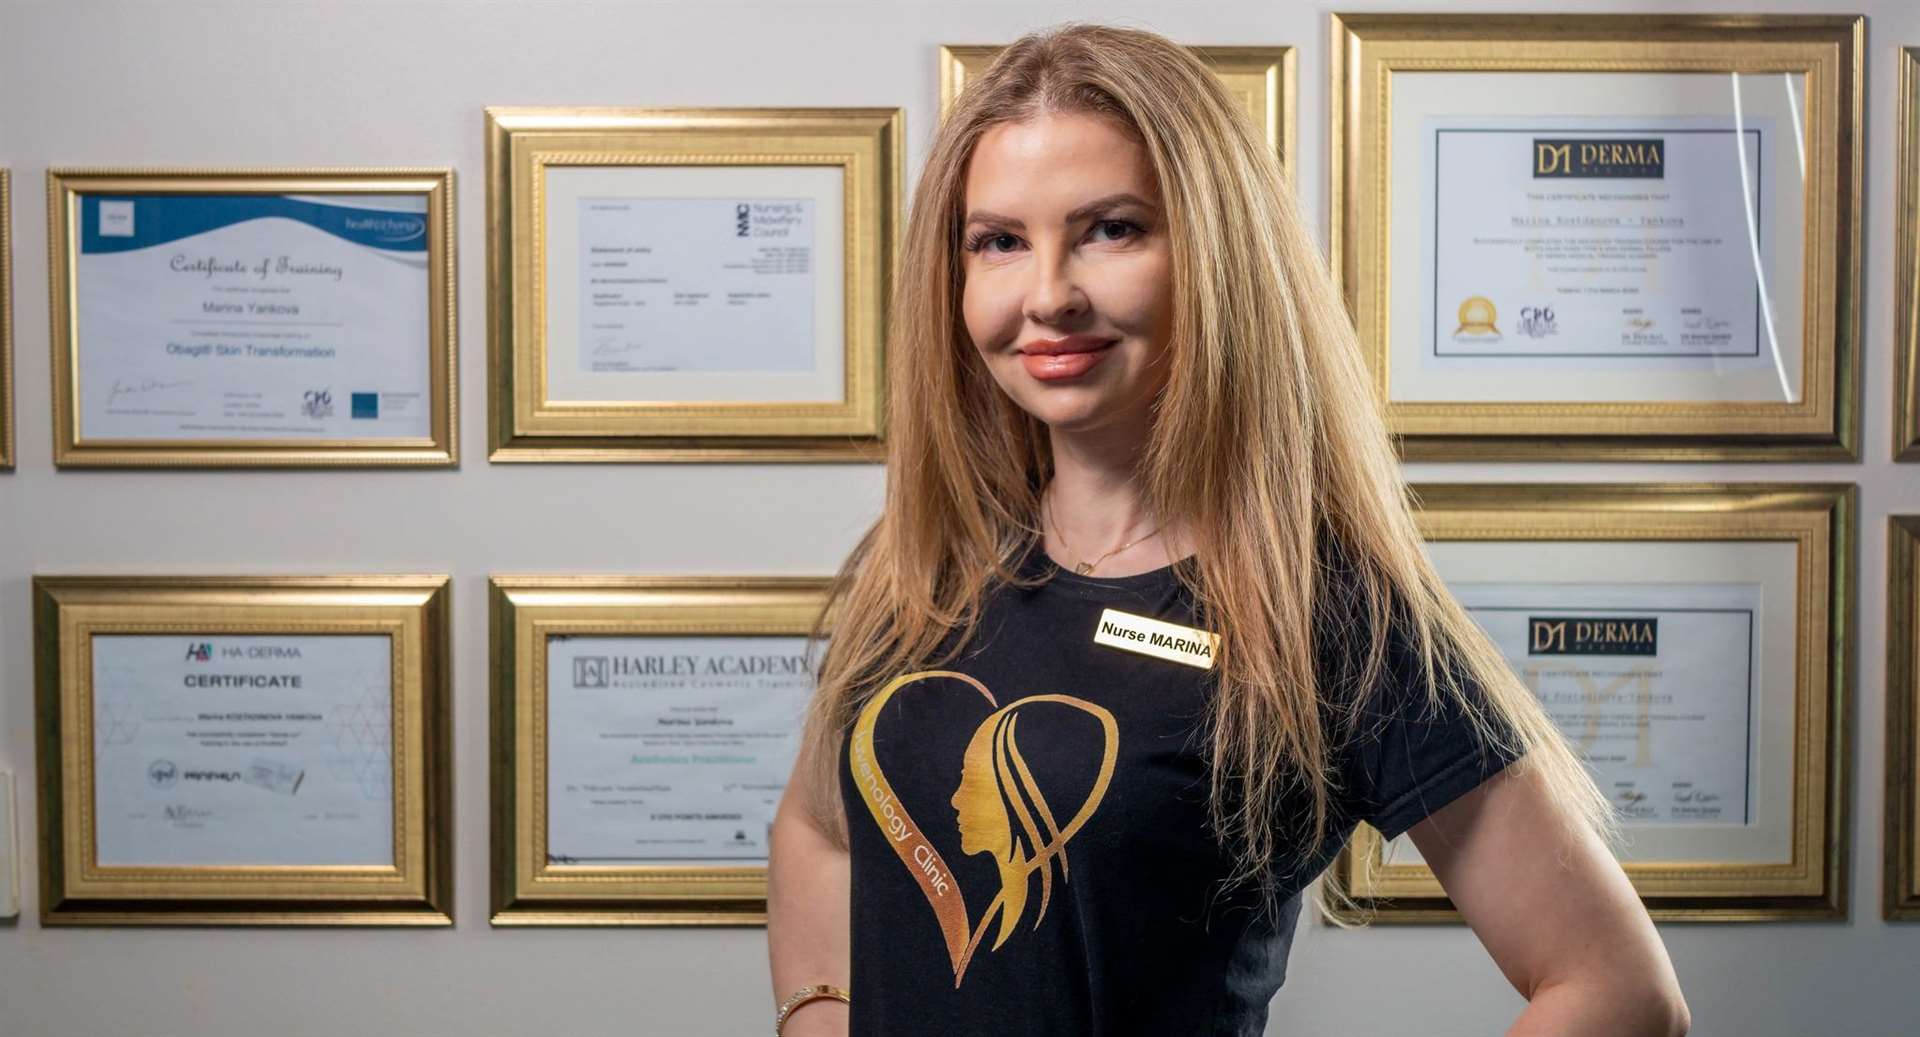 Marina Yankova: “I am deeply passionate about aesthetic medicine and have invested in ongoing education to sharpen my clinical skills and injection techniques.”